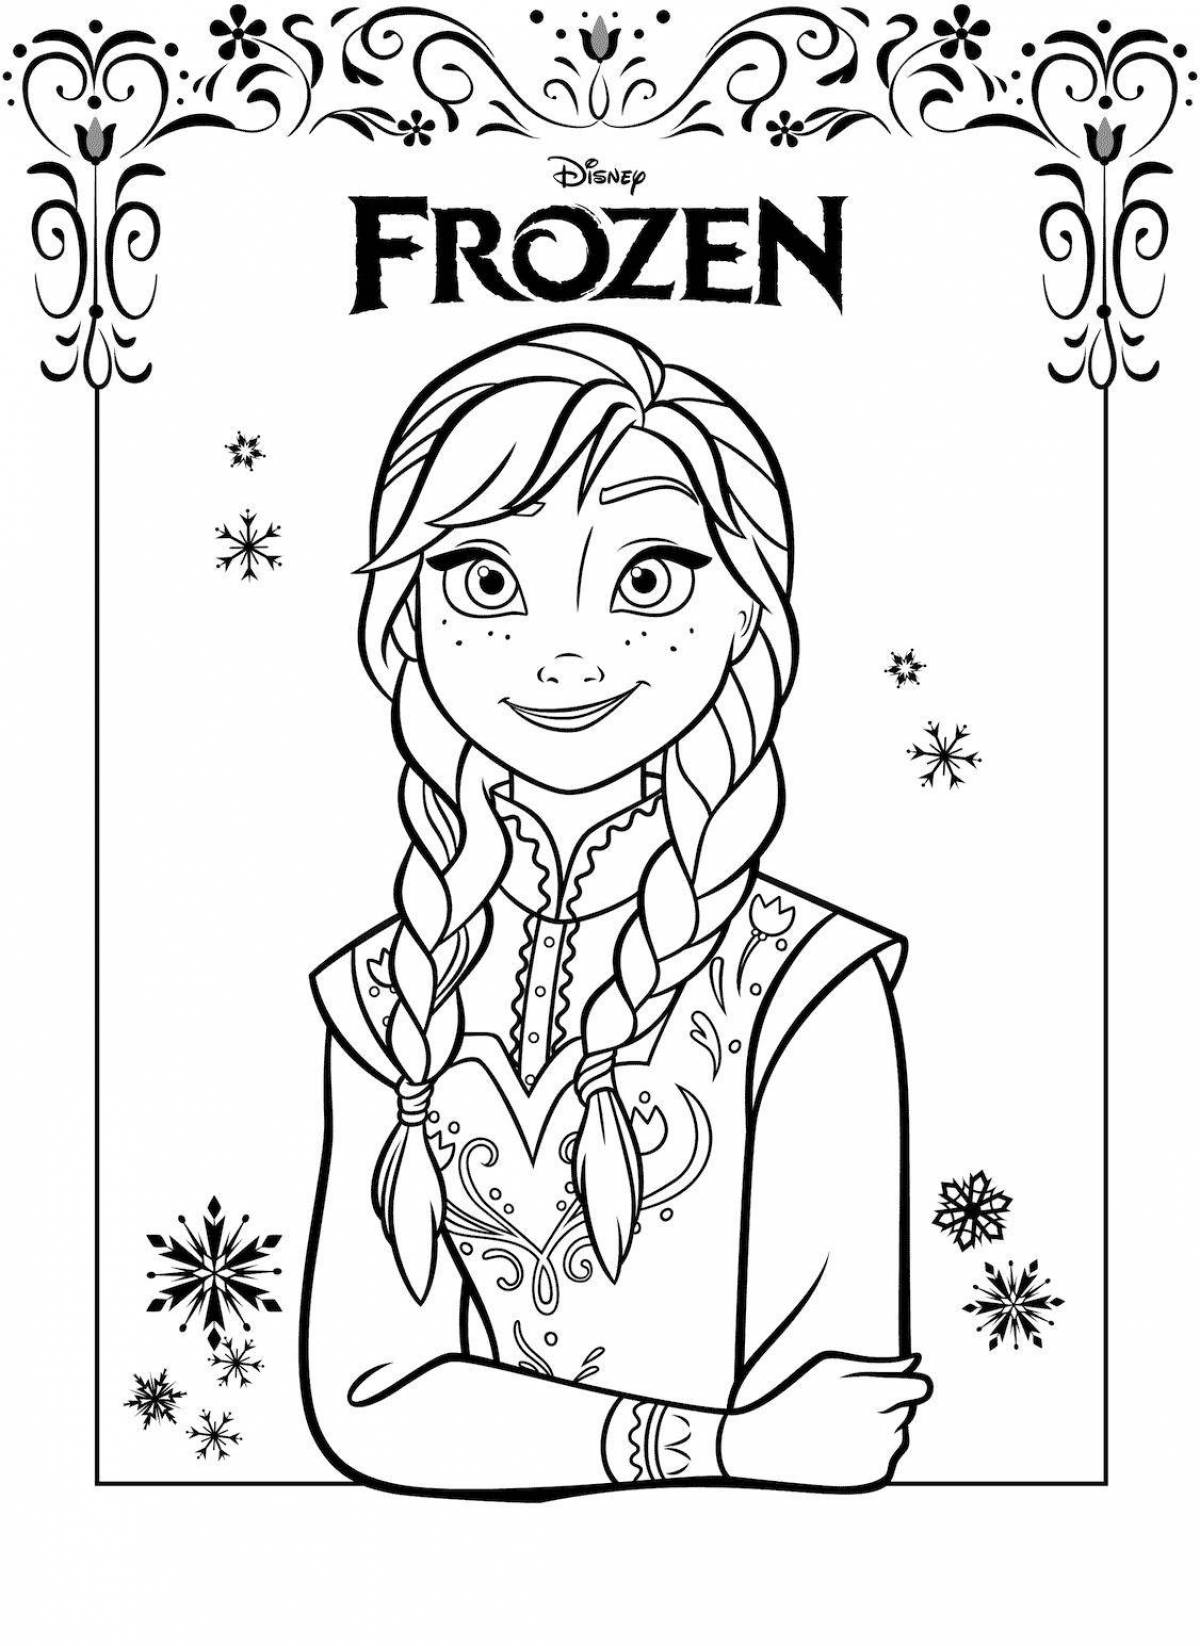 Anna's playful coloring for children